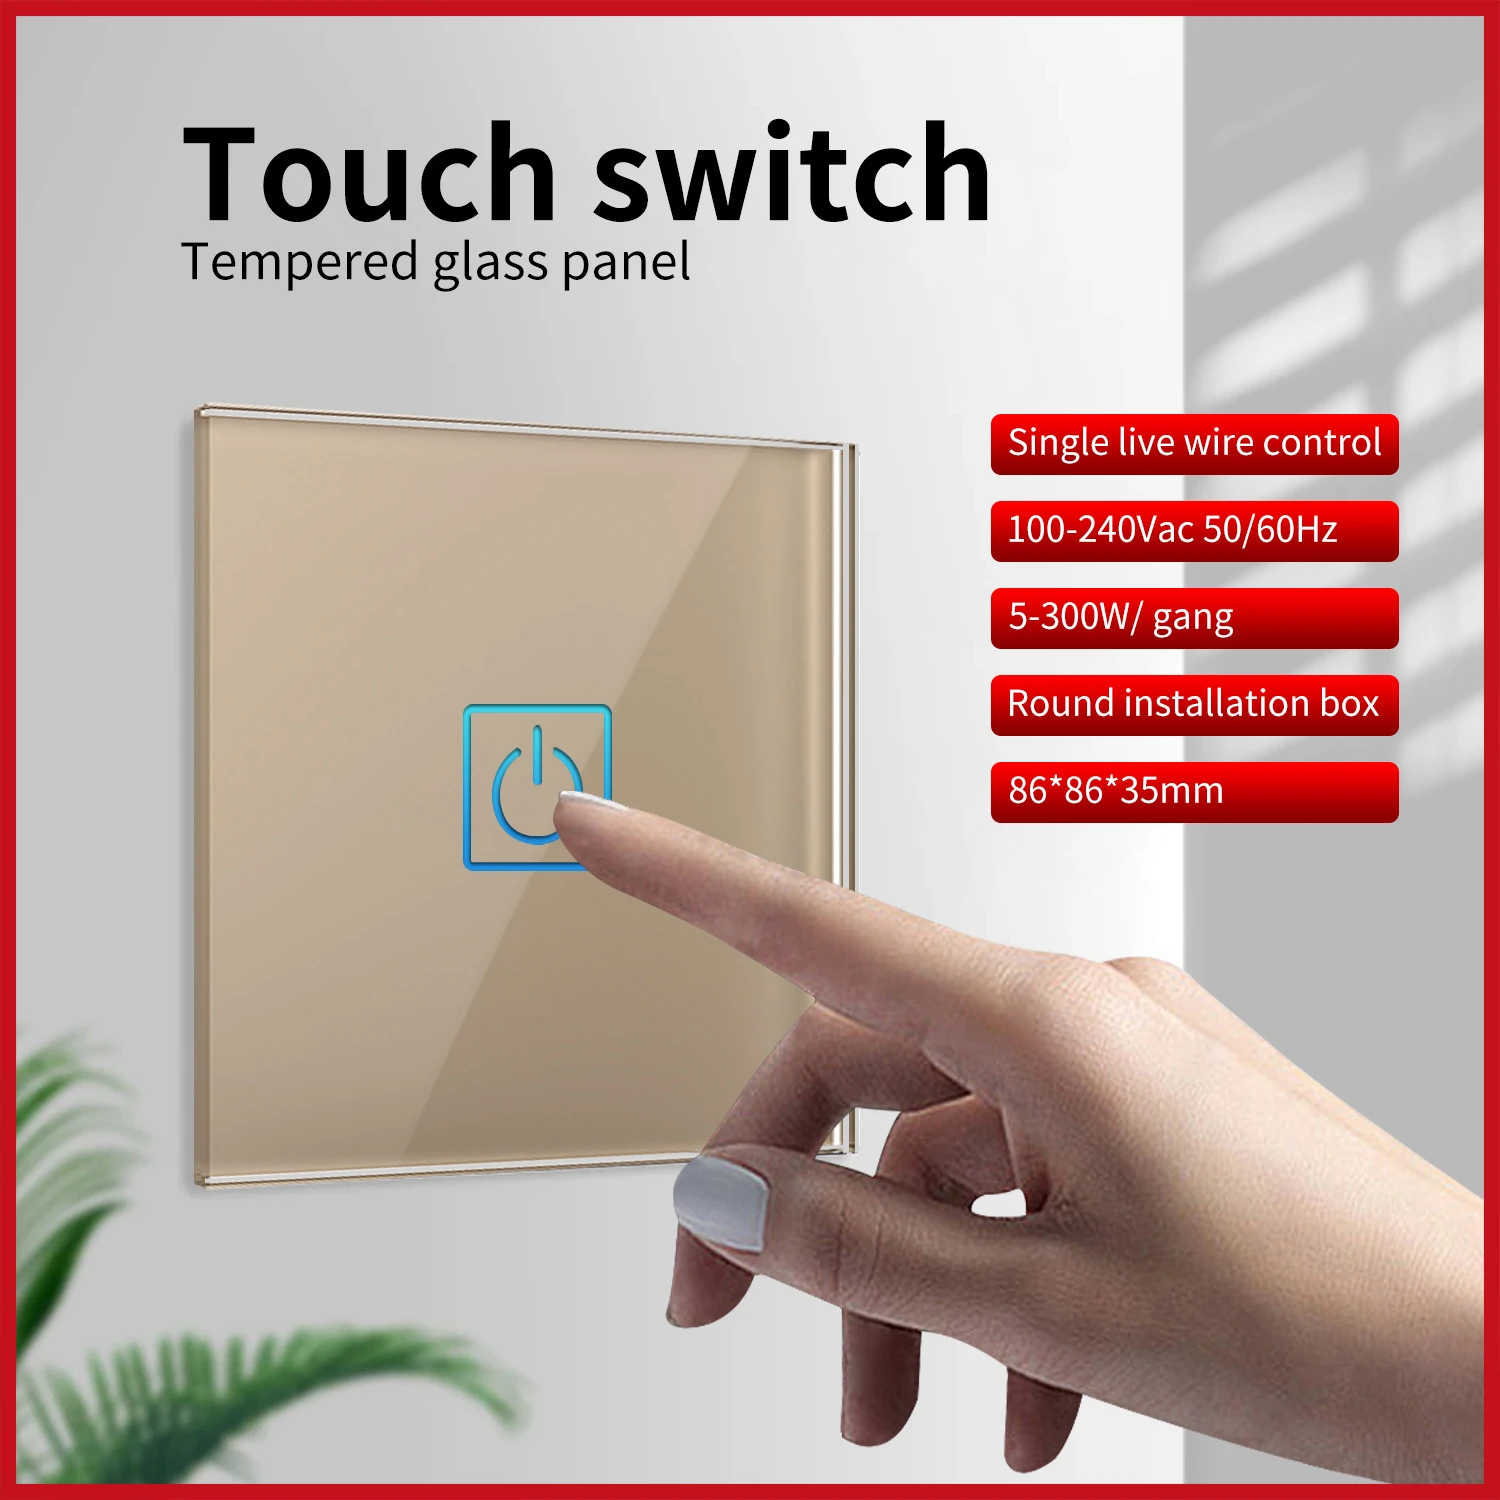 UBARO Wall Touch Light Switch EU/UK Standard Tempered Glass Panel On/Off Electrical Sensor Manual Button Led Indicator  Ac220V